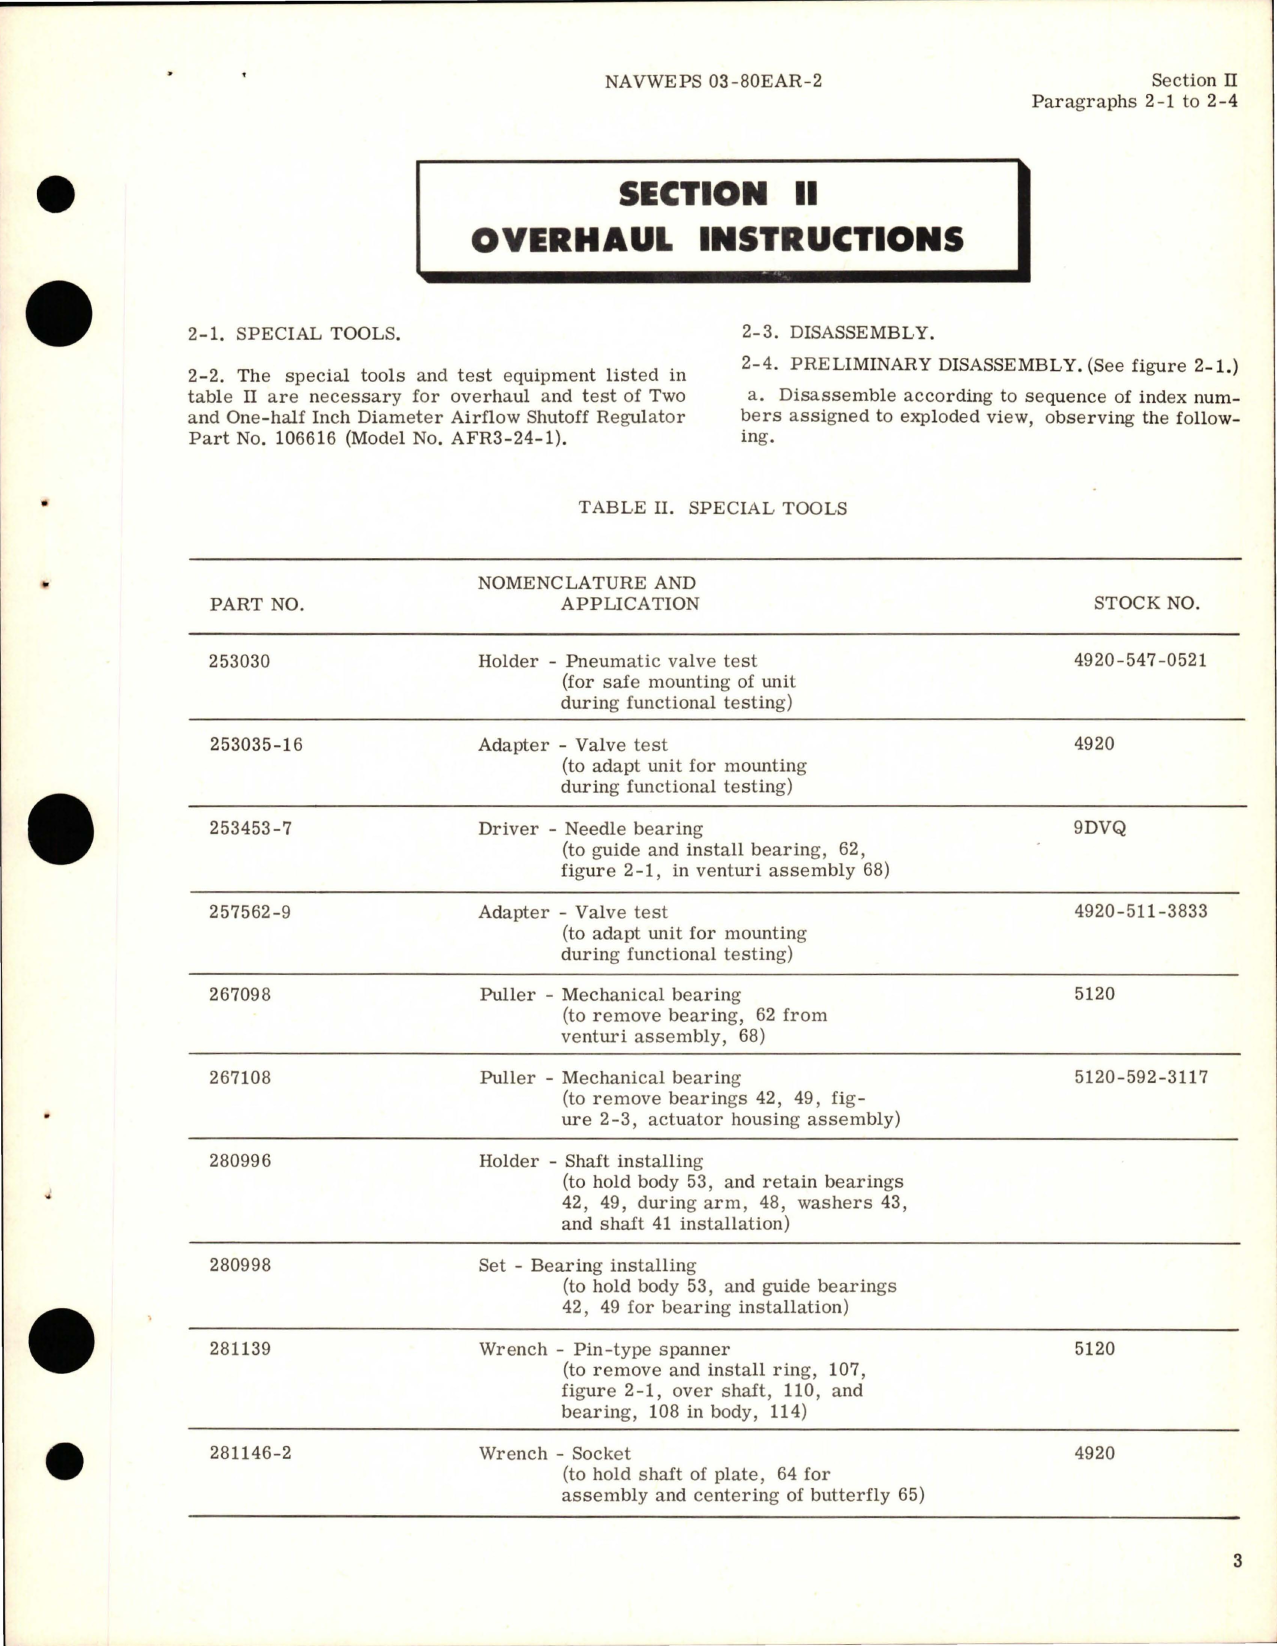 Sample page 7 from AirCorps Library document: Overhaul Instructions for Two and One-Half Inch Diameter Shutoff Airflow Regulator - Part 106616